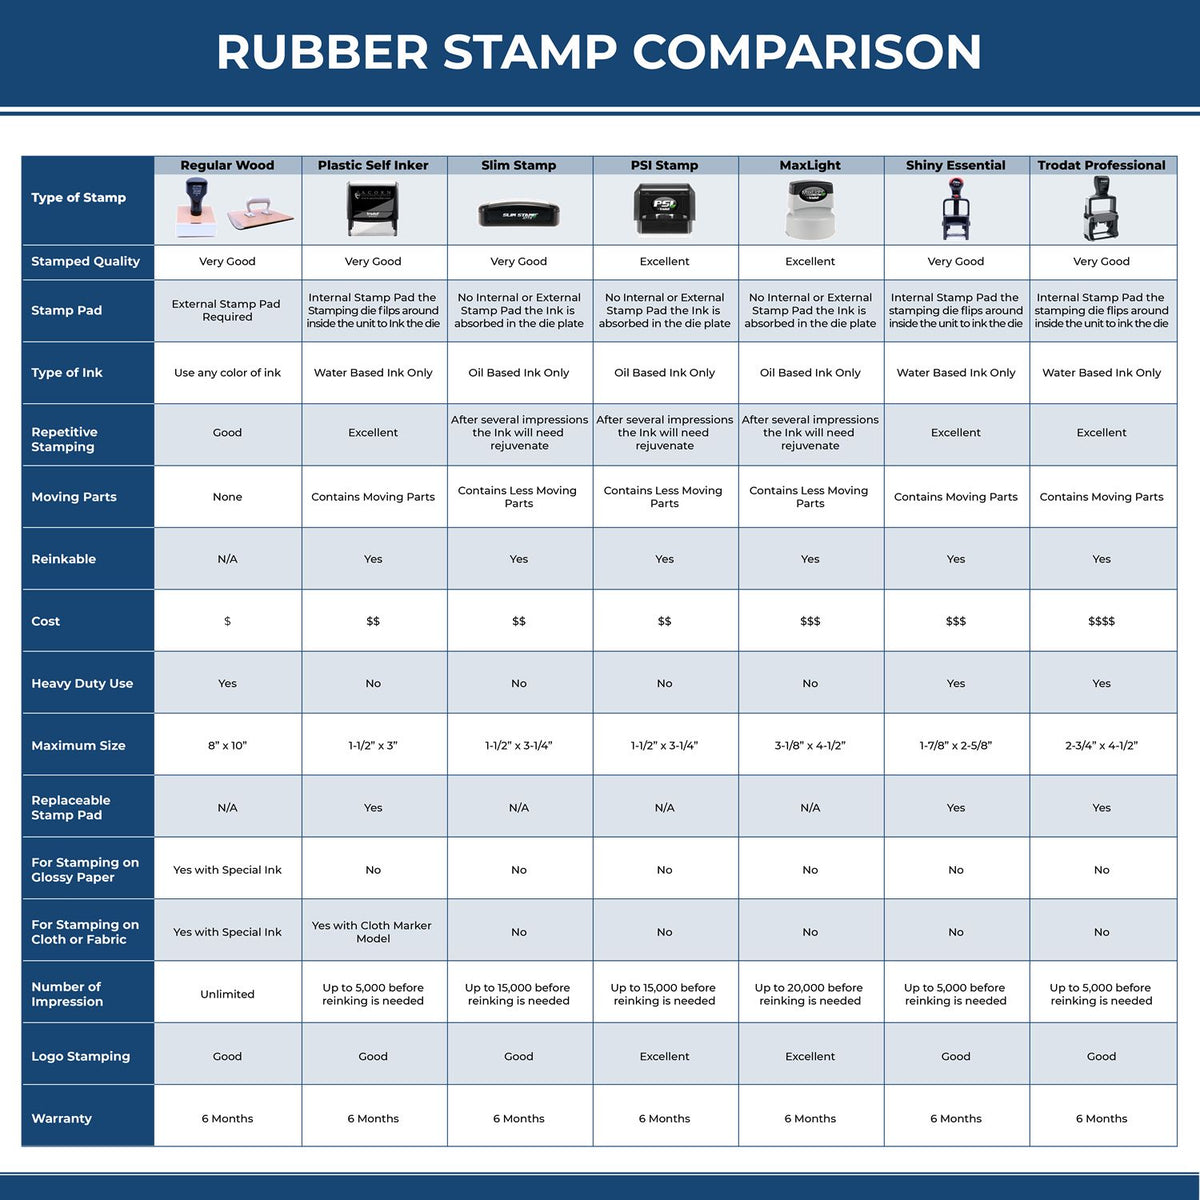 Large Confirmation Rubber Stamp 4902R Rubber Stamp Comparison